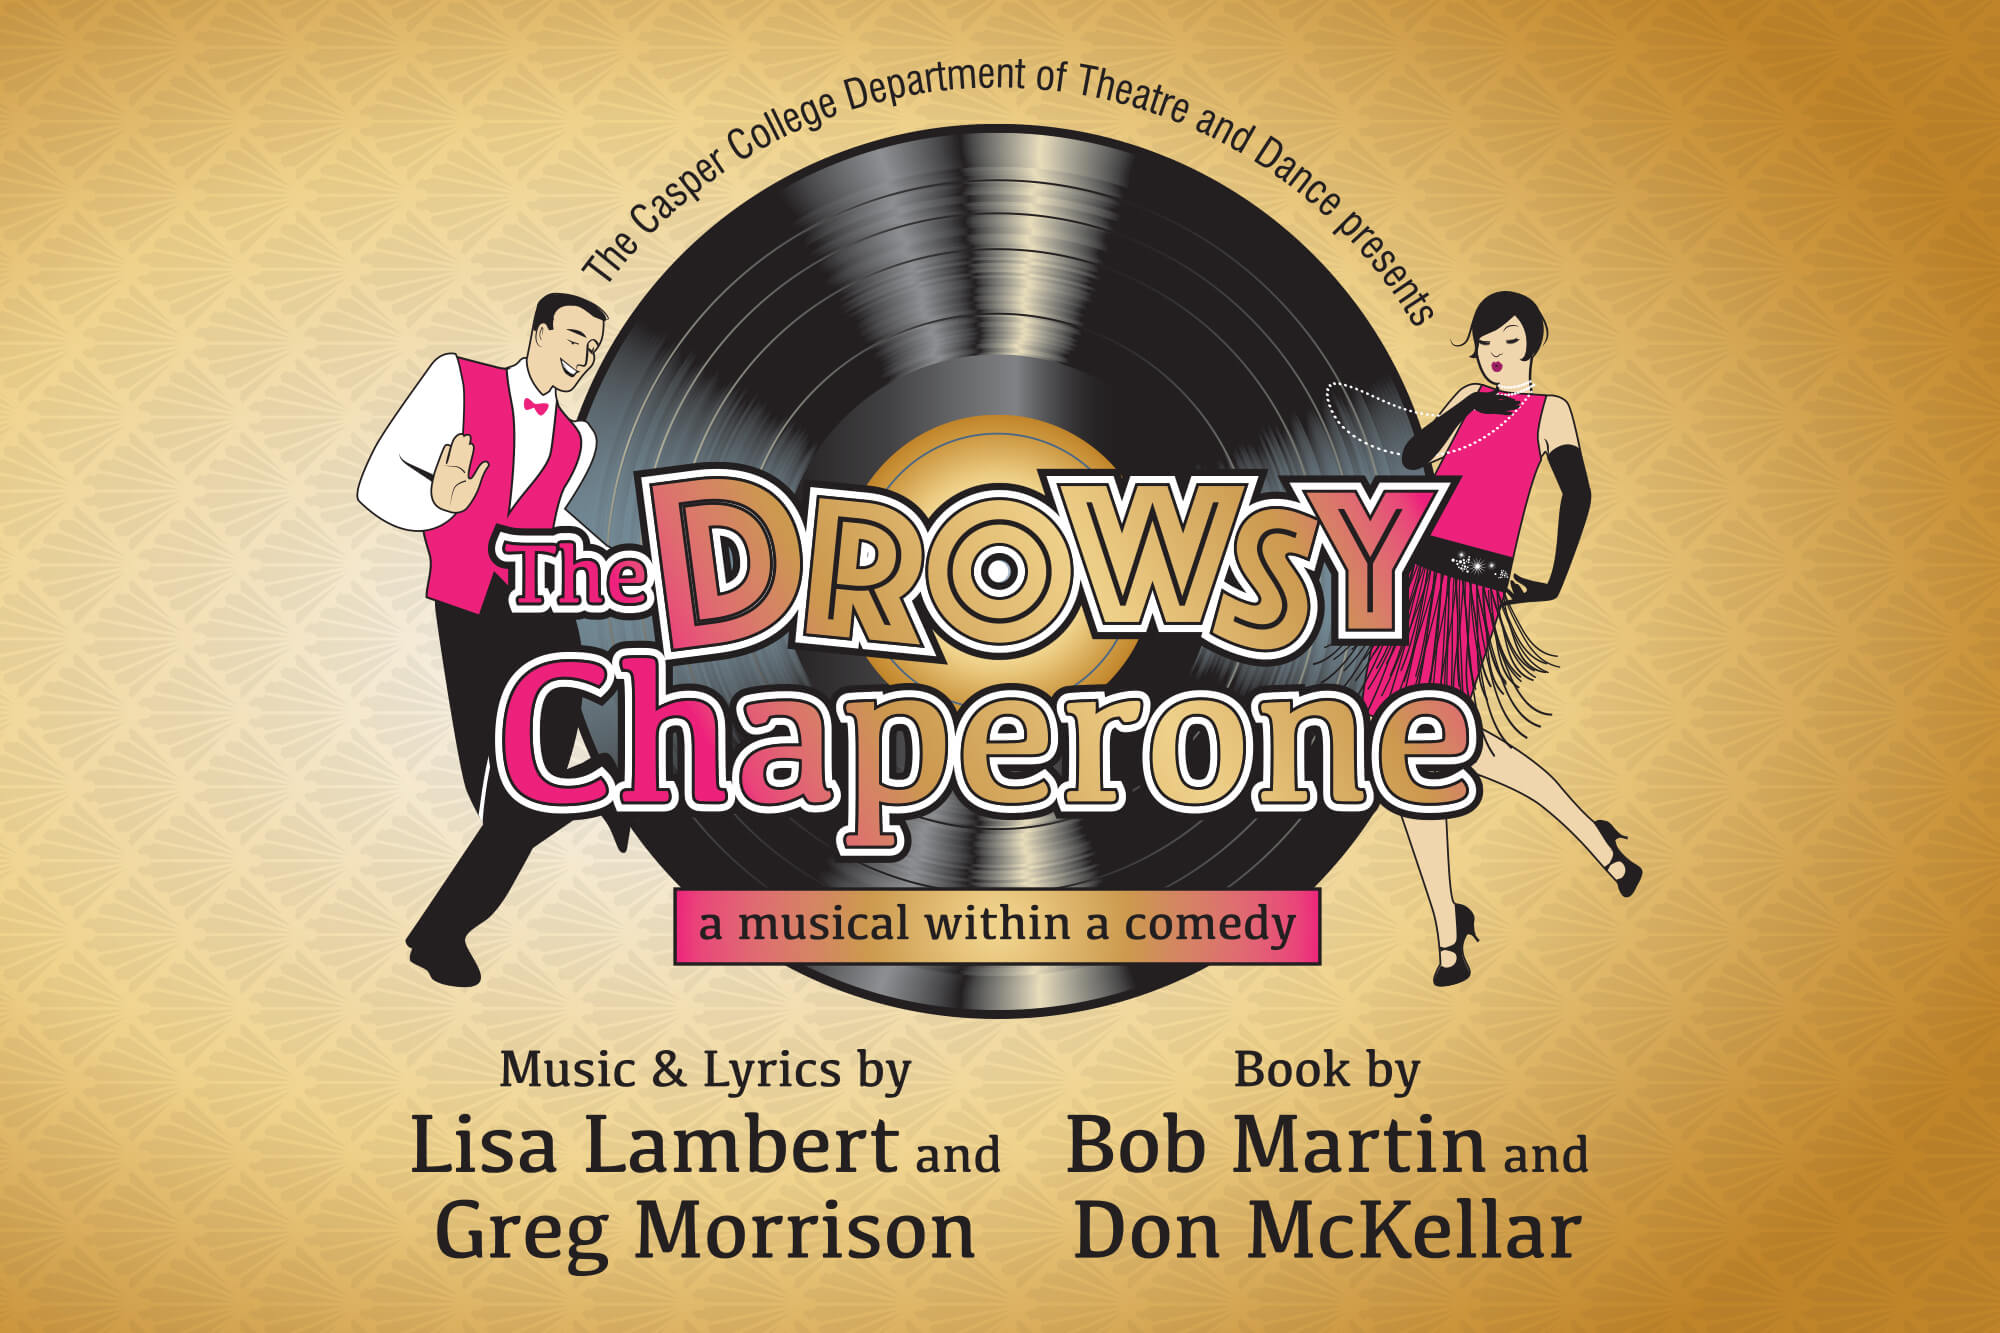 Image for "The Drowsy Chaperone" press release.